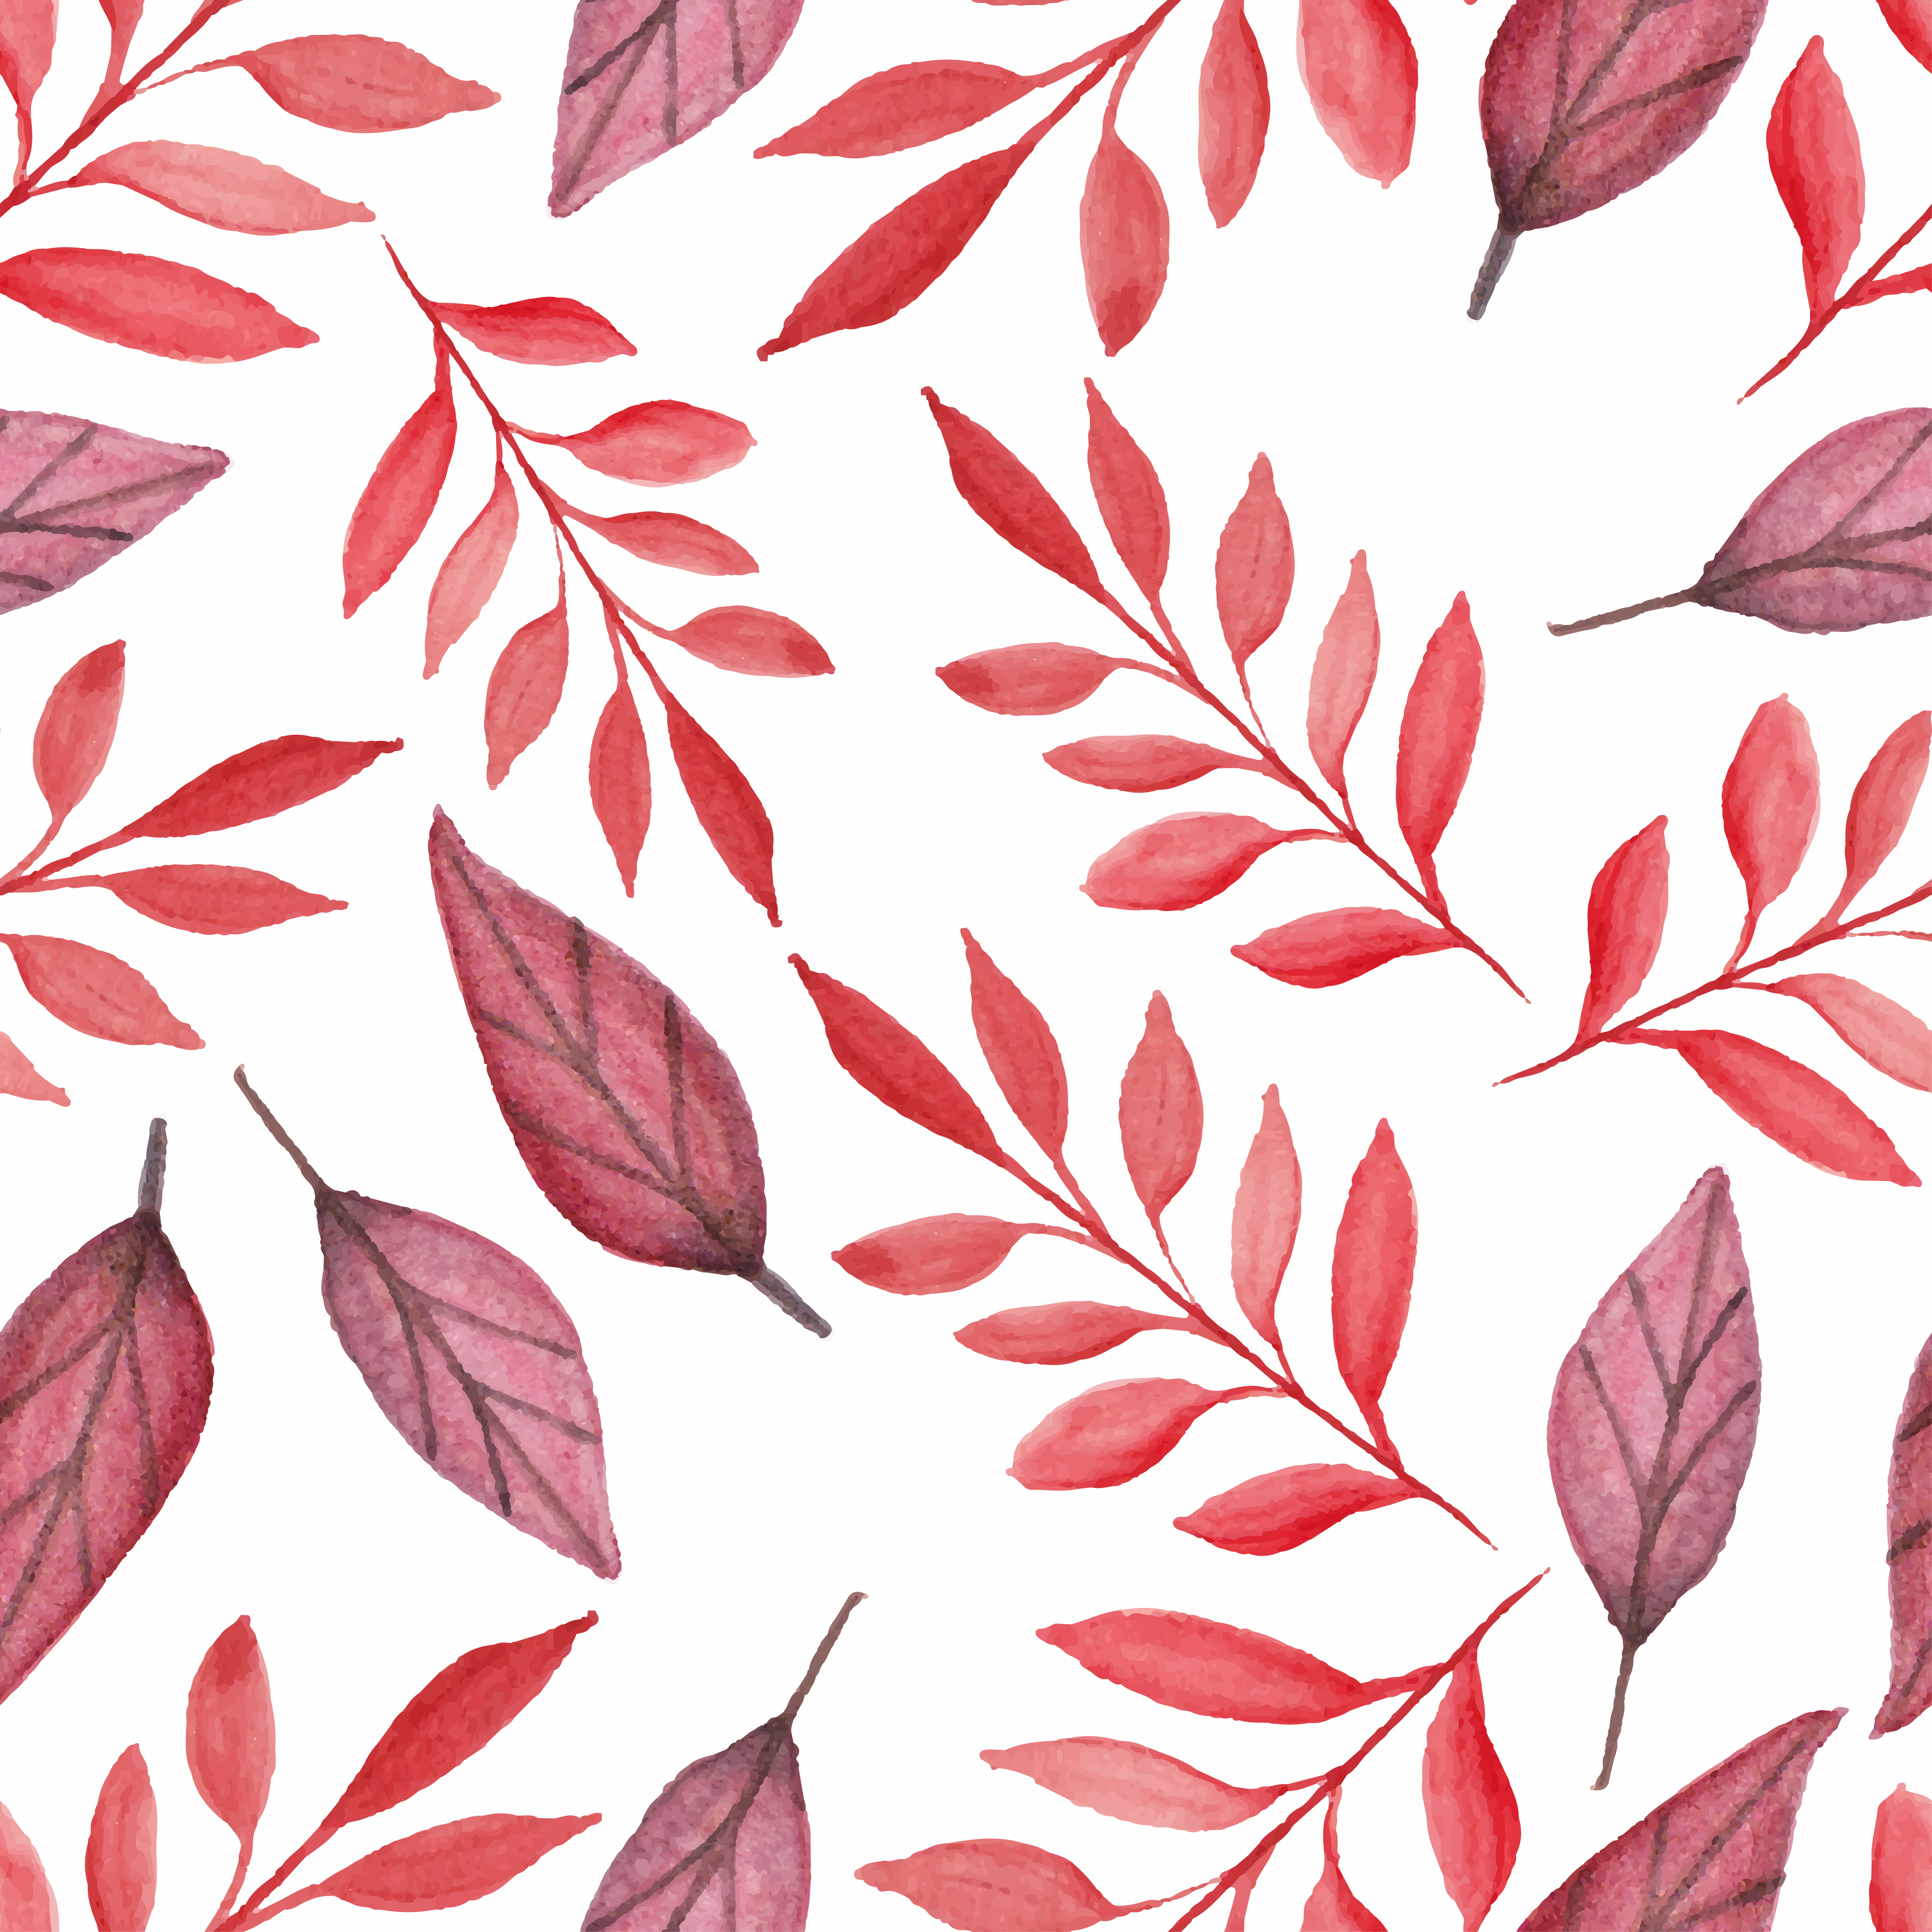 Beautiful Red Leaves Watercolor Seamless Pattern Download Free Vectors Clipart Graphics Vector Art